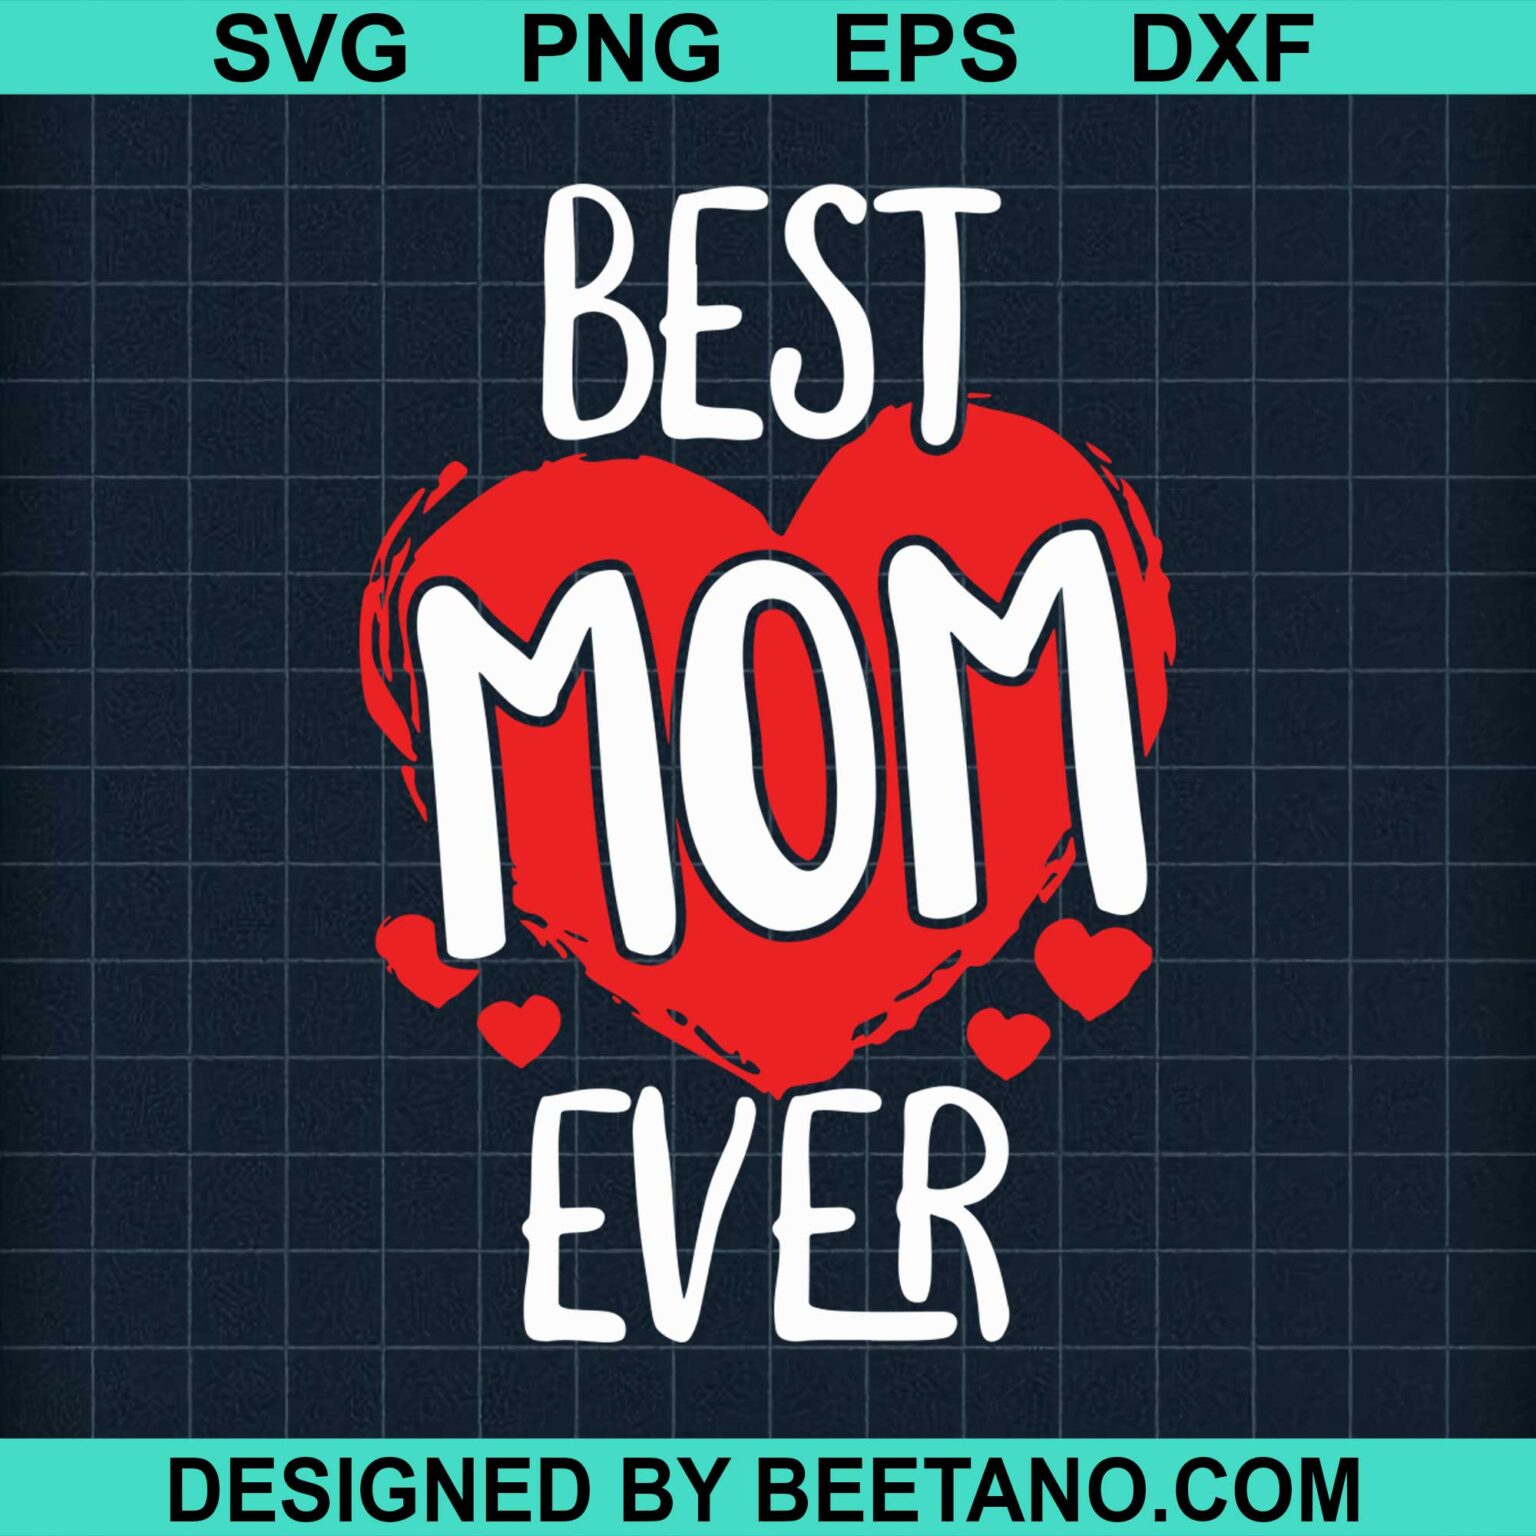 Best Mom Ever Svg Files, Mother's Day Svg, Happy Mother's Day Svg Files ...